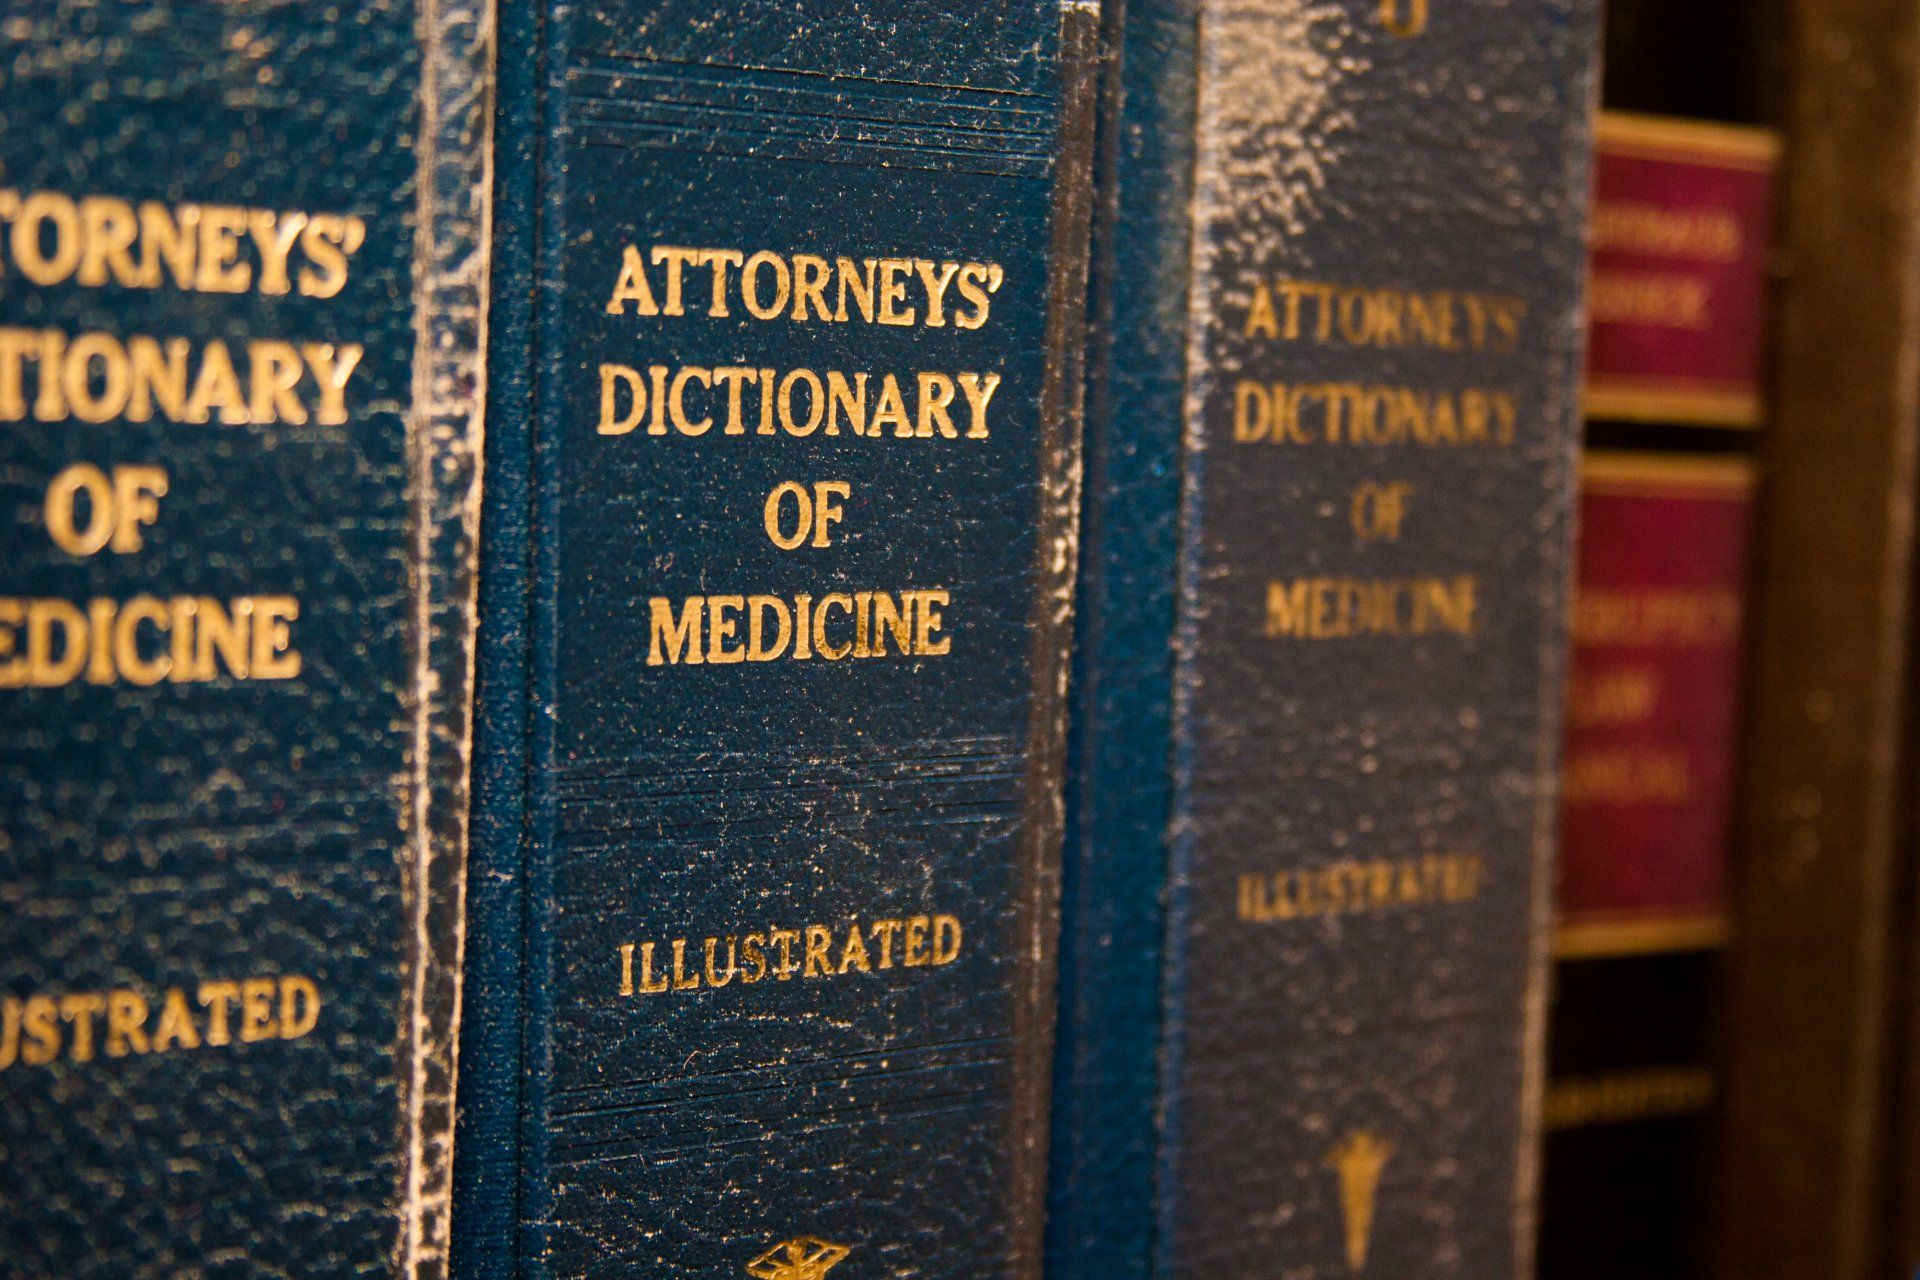 Medical Error Attorney — Attorney Medical Dictionary in Chicago, IL